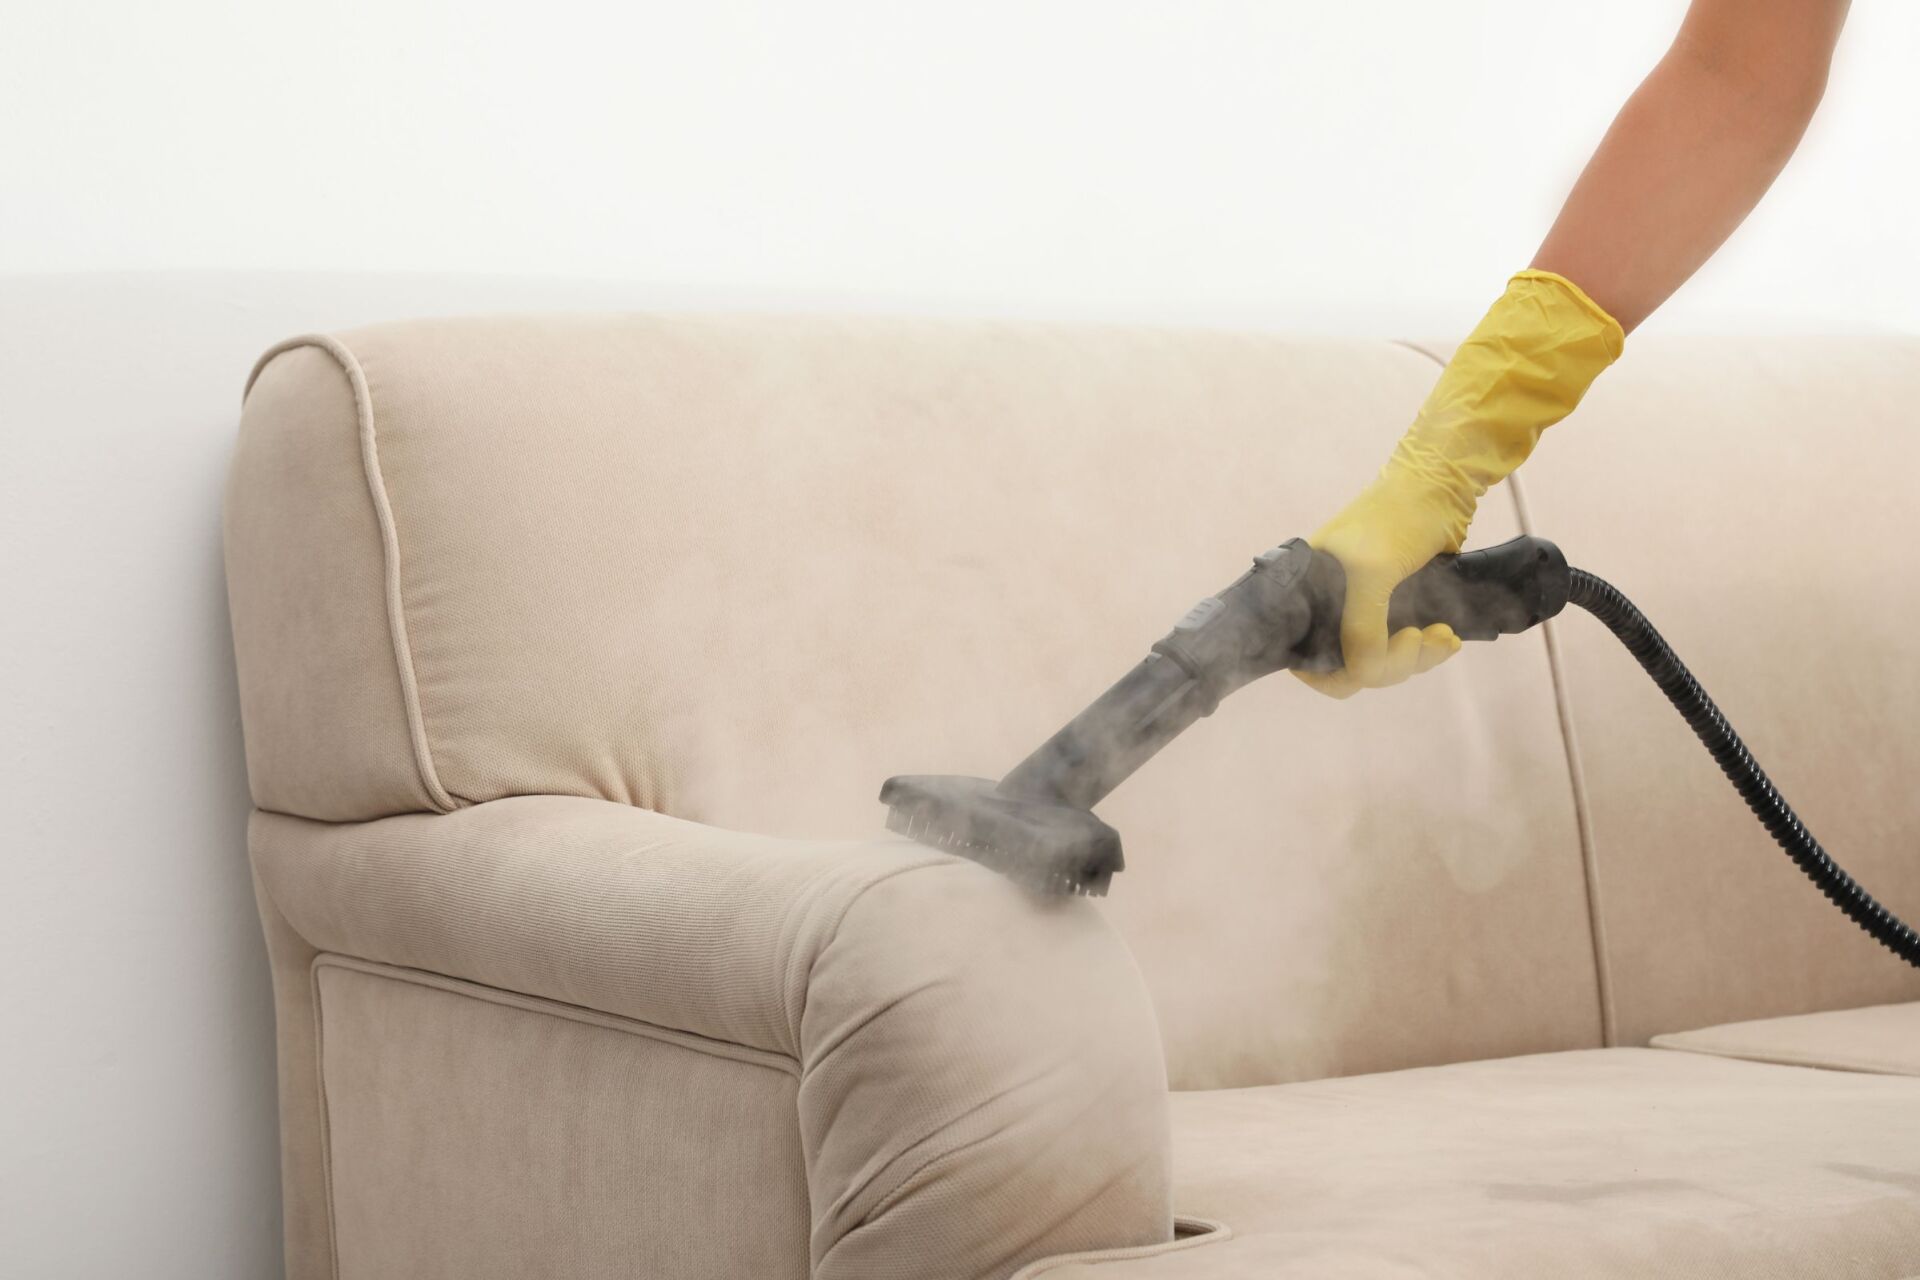 Removing Dirt From Sofa With Steam Cleaner — Pest Control & Carpet Cleaning Services in Hervey Bay, QLD